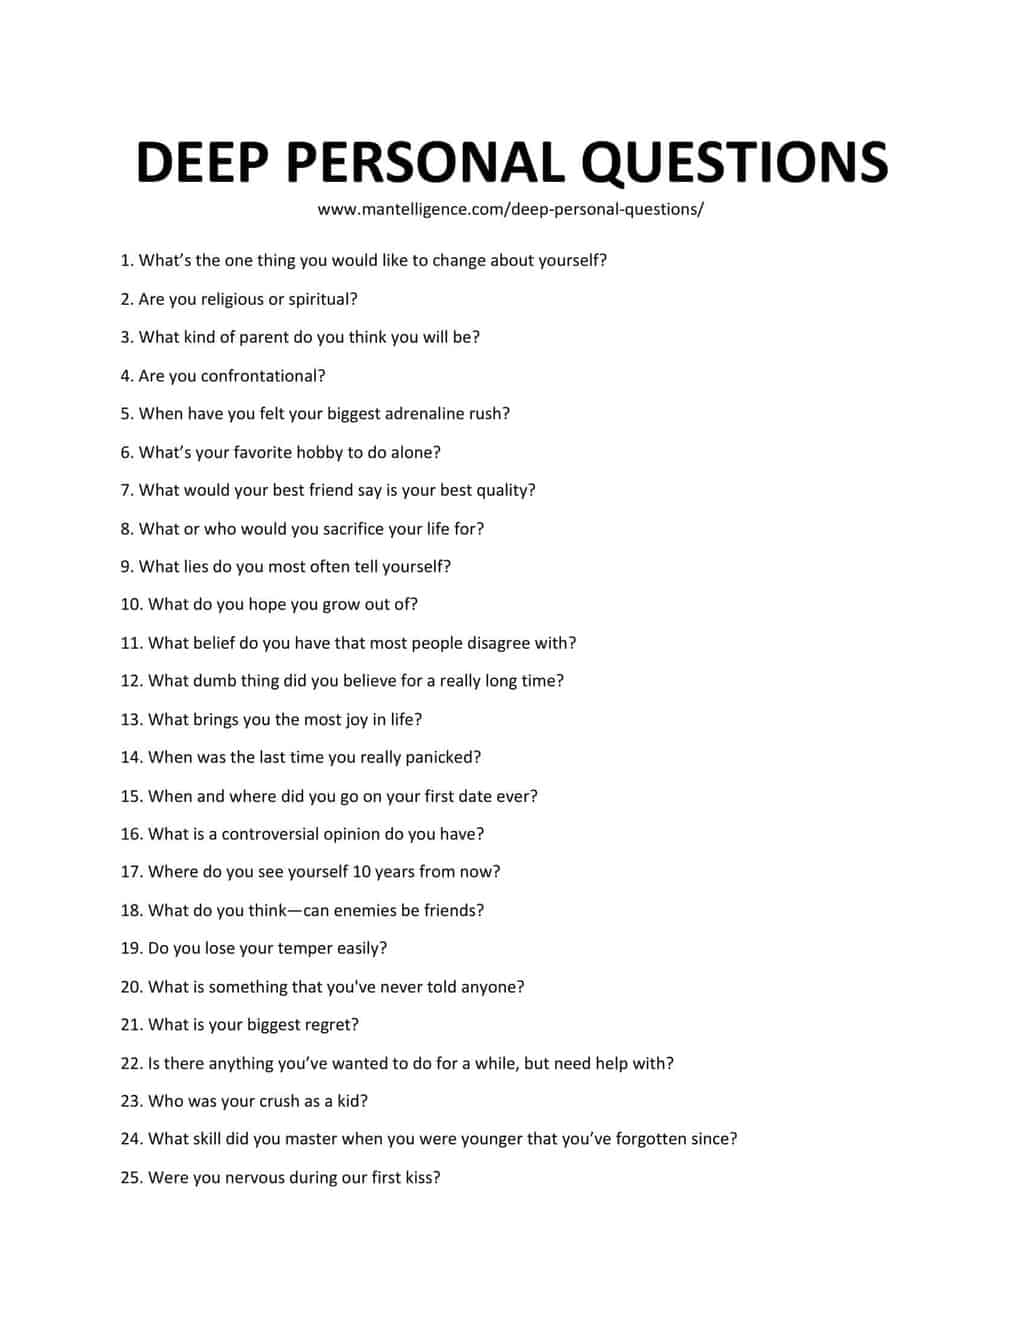 Downloadable and printable jpg/pdf list of Deep Personal Questions